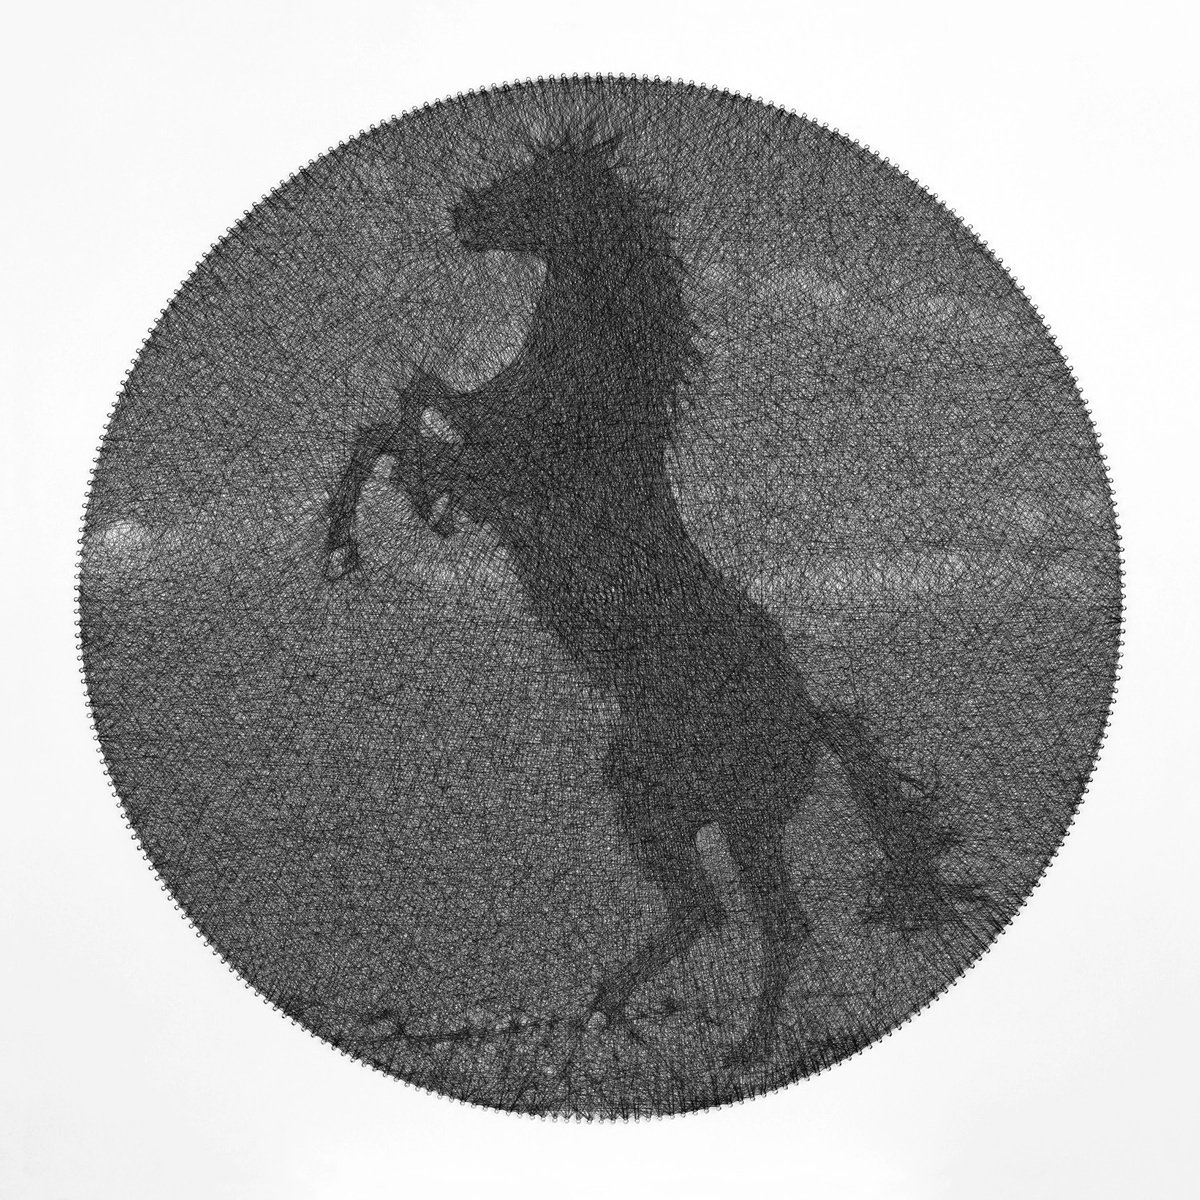 Rearing Black Horse Circular String Art to Live Through the Harsh Times by Andrey Saharov